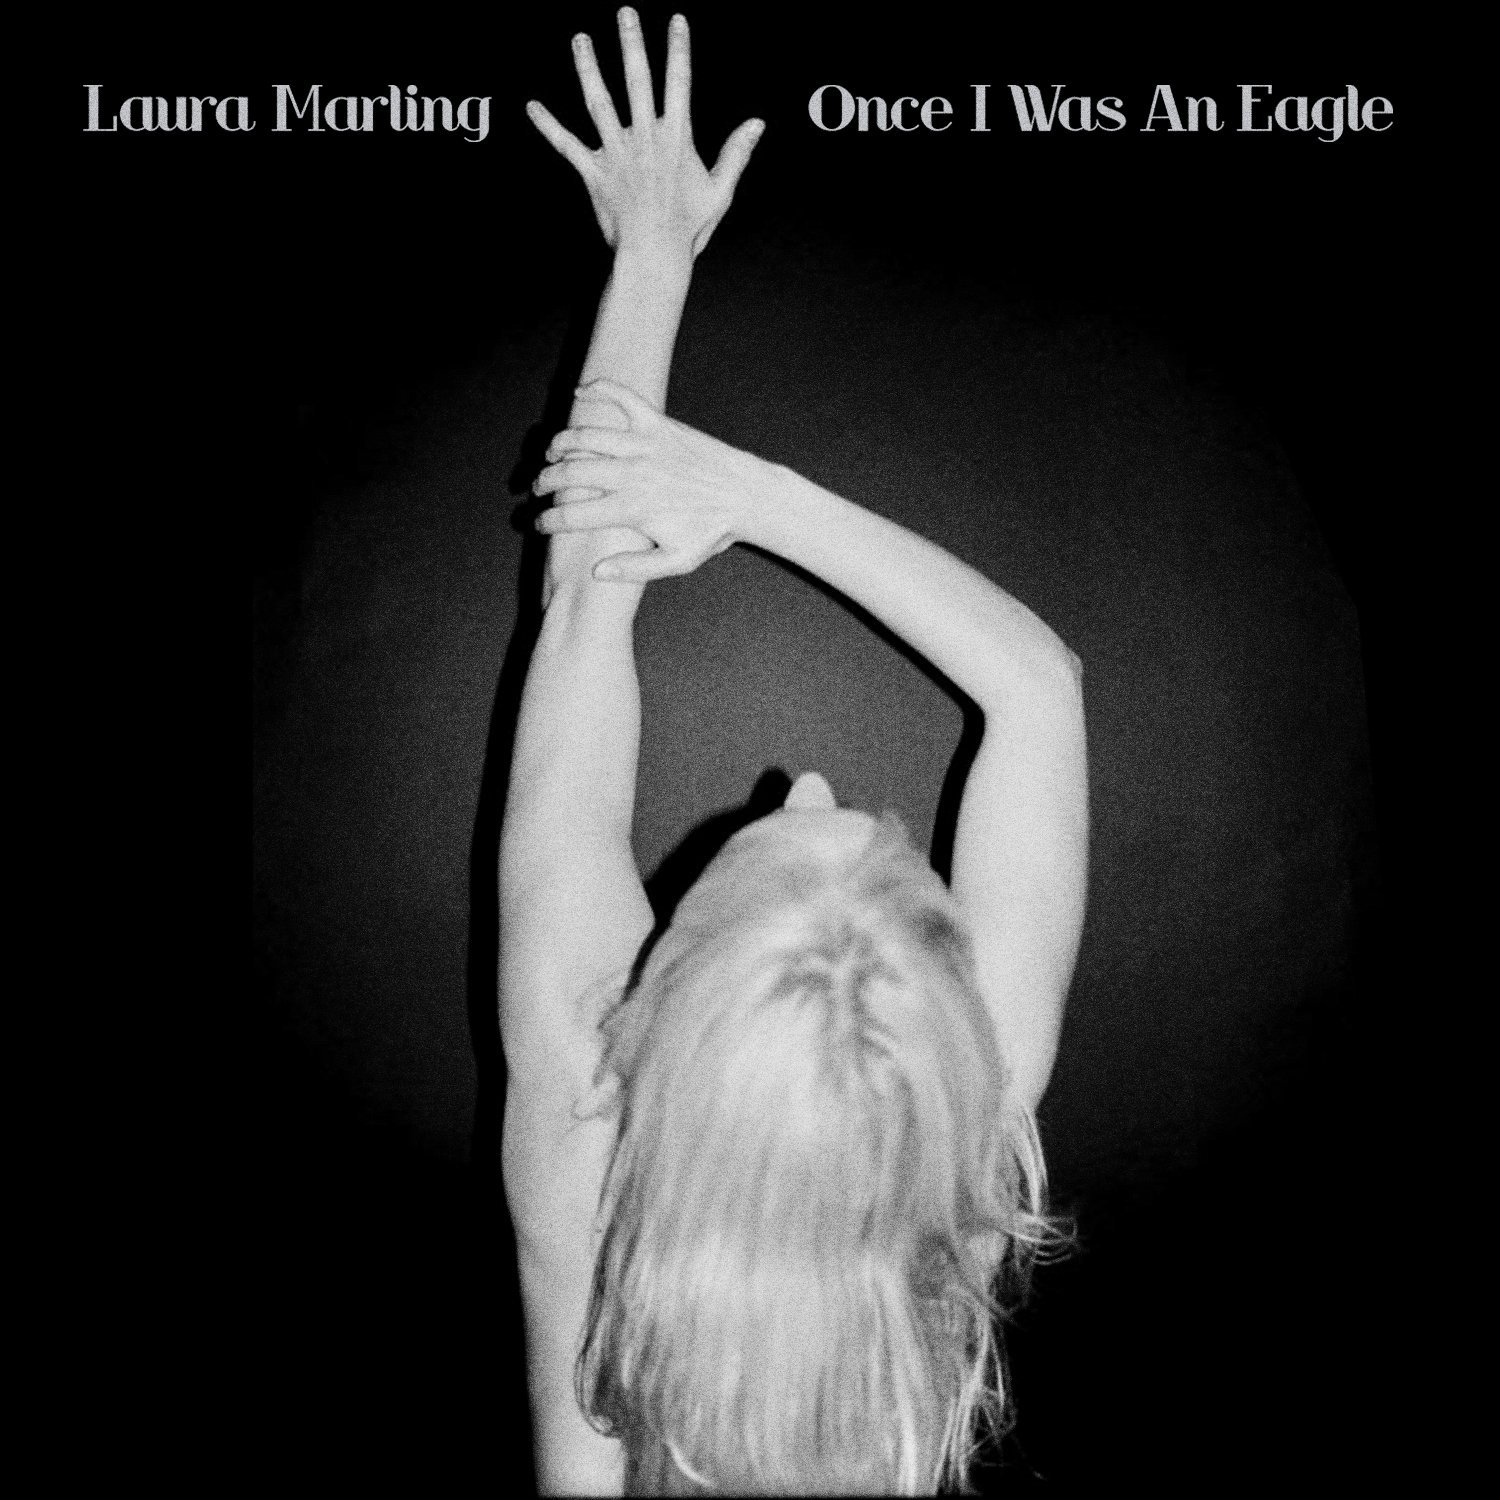 The album cover for Laura Marling's Once I Was an Eagle